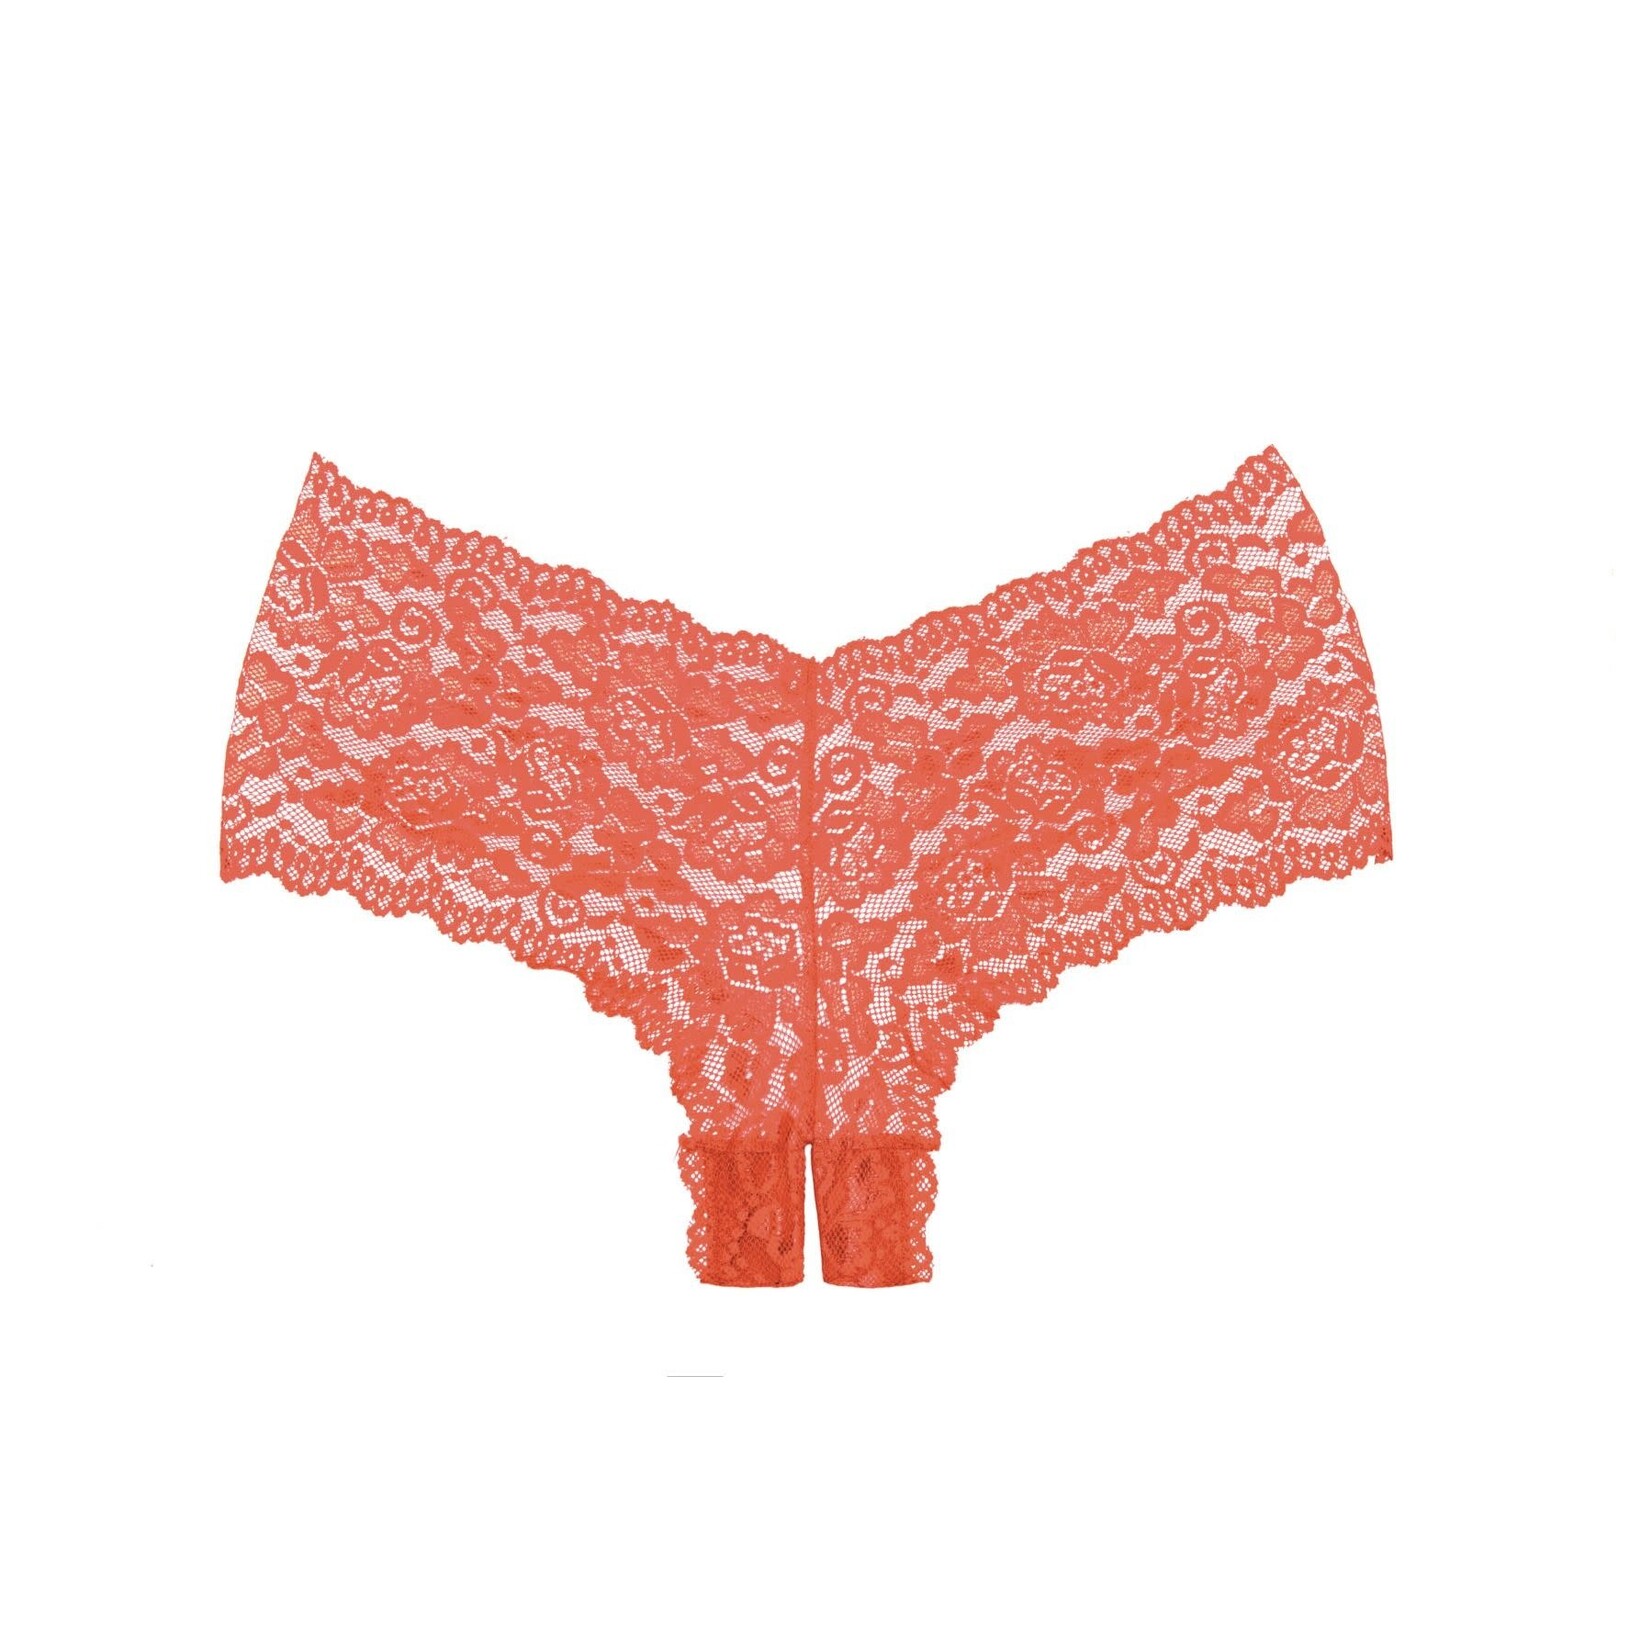 ALLURE LINGERIE ALLURE ADORE - CANDY APPLE PANTY - RED - ONE SIZE